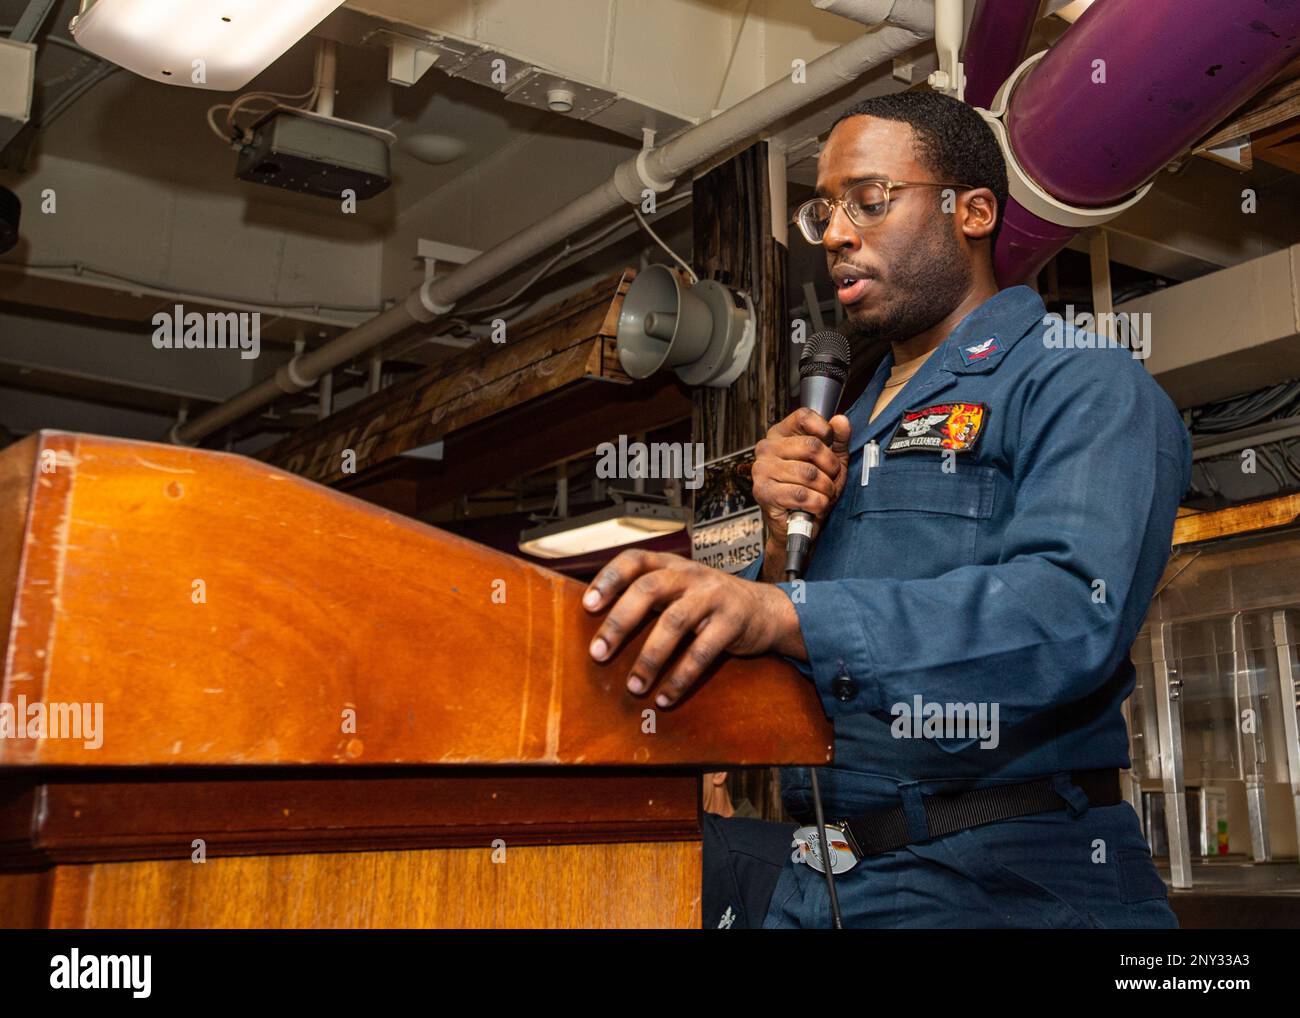 230218-N-MH015-1011 SOUTH CHINA SEA (Feb. 18, 2023) U.S. Navy Aviation Electronics Technician 2nd Class Alexander Amerson, from Columbus, Ga., speaks at a Black History Month celebration in the aft mess decks aboard the aircraft carrier USS Nimitz (CVN 68). Nimitz is in U.S. 7th Fleet conducting routine operations. 7th Fleet is the U.S. Navy's largest forward-deployed numbered fleet, and routinely interacts and operates with Allies and partners in preserving a free and open Indo-Pacific region. Stock Photo